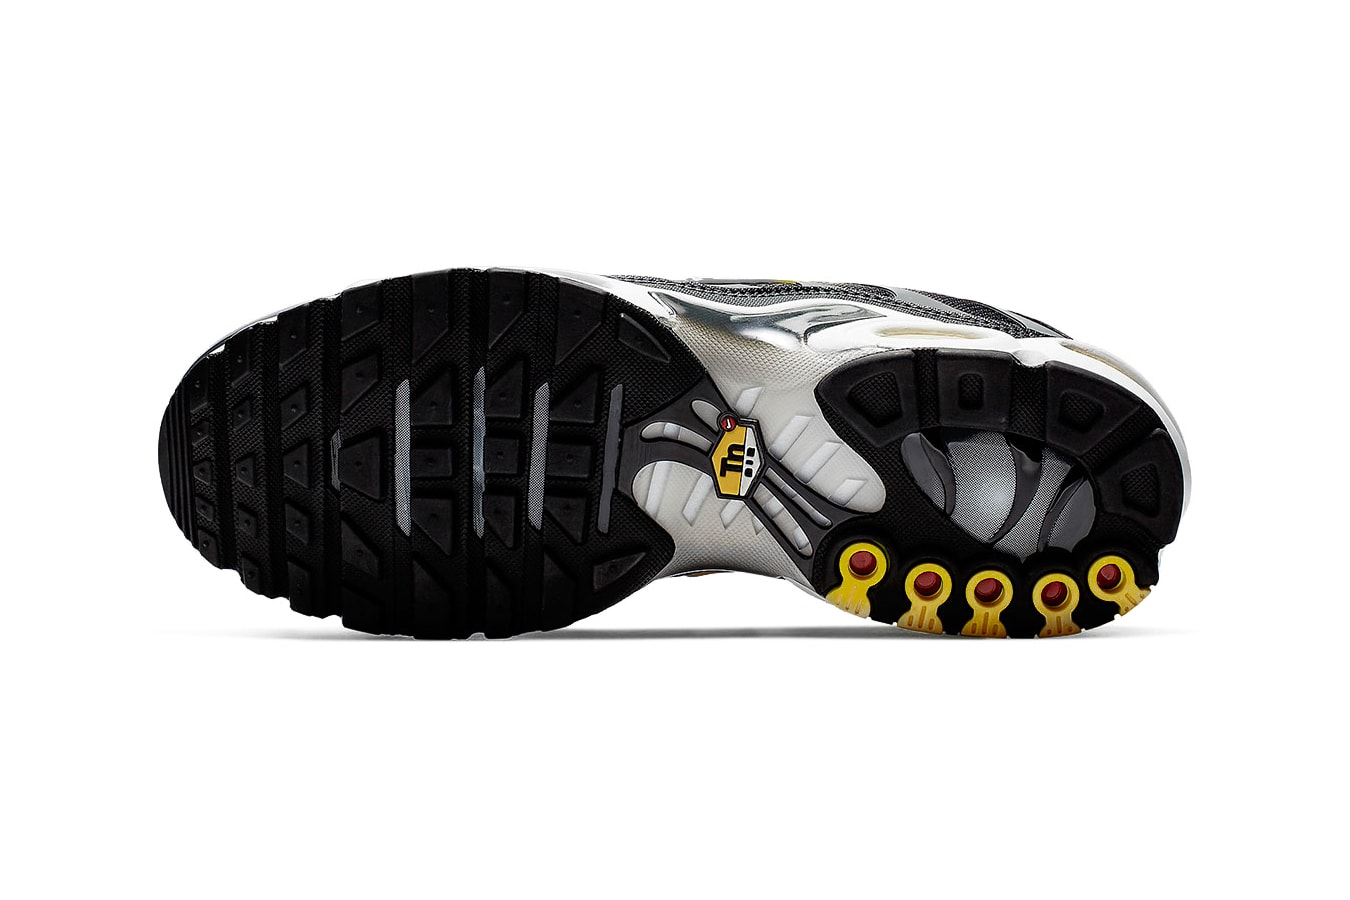 Nike Electrifies Air Max Plus With "Bumble Bee" Colorway grey black yellow footwear release drop date images price info